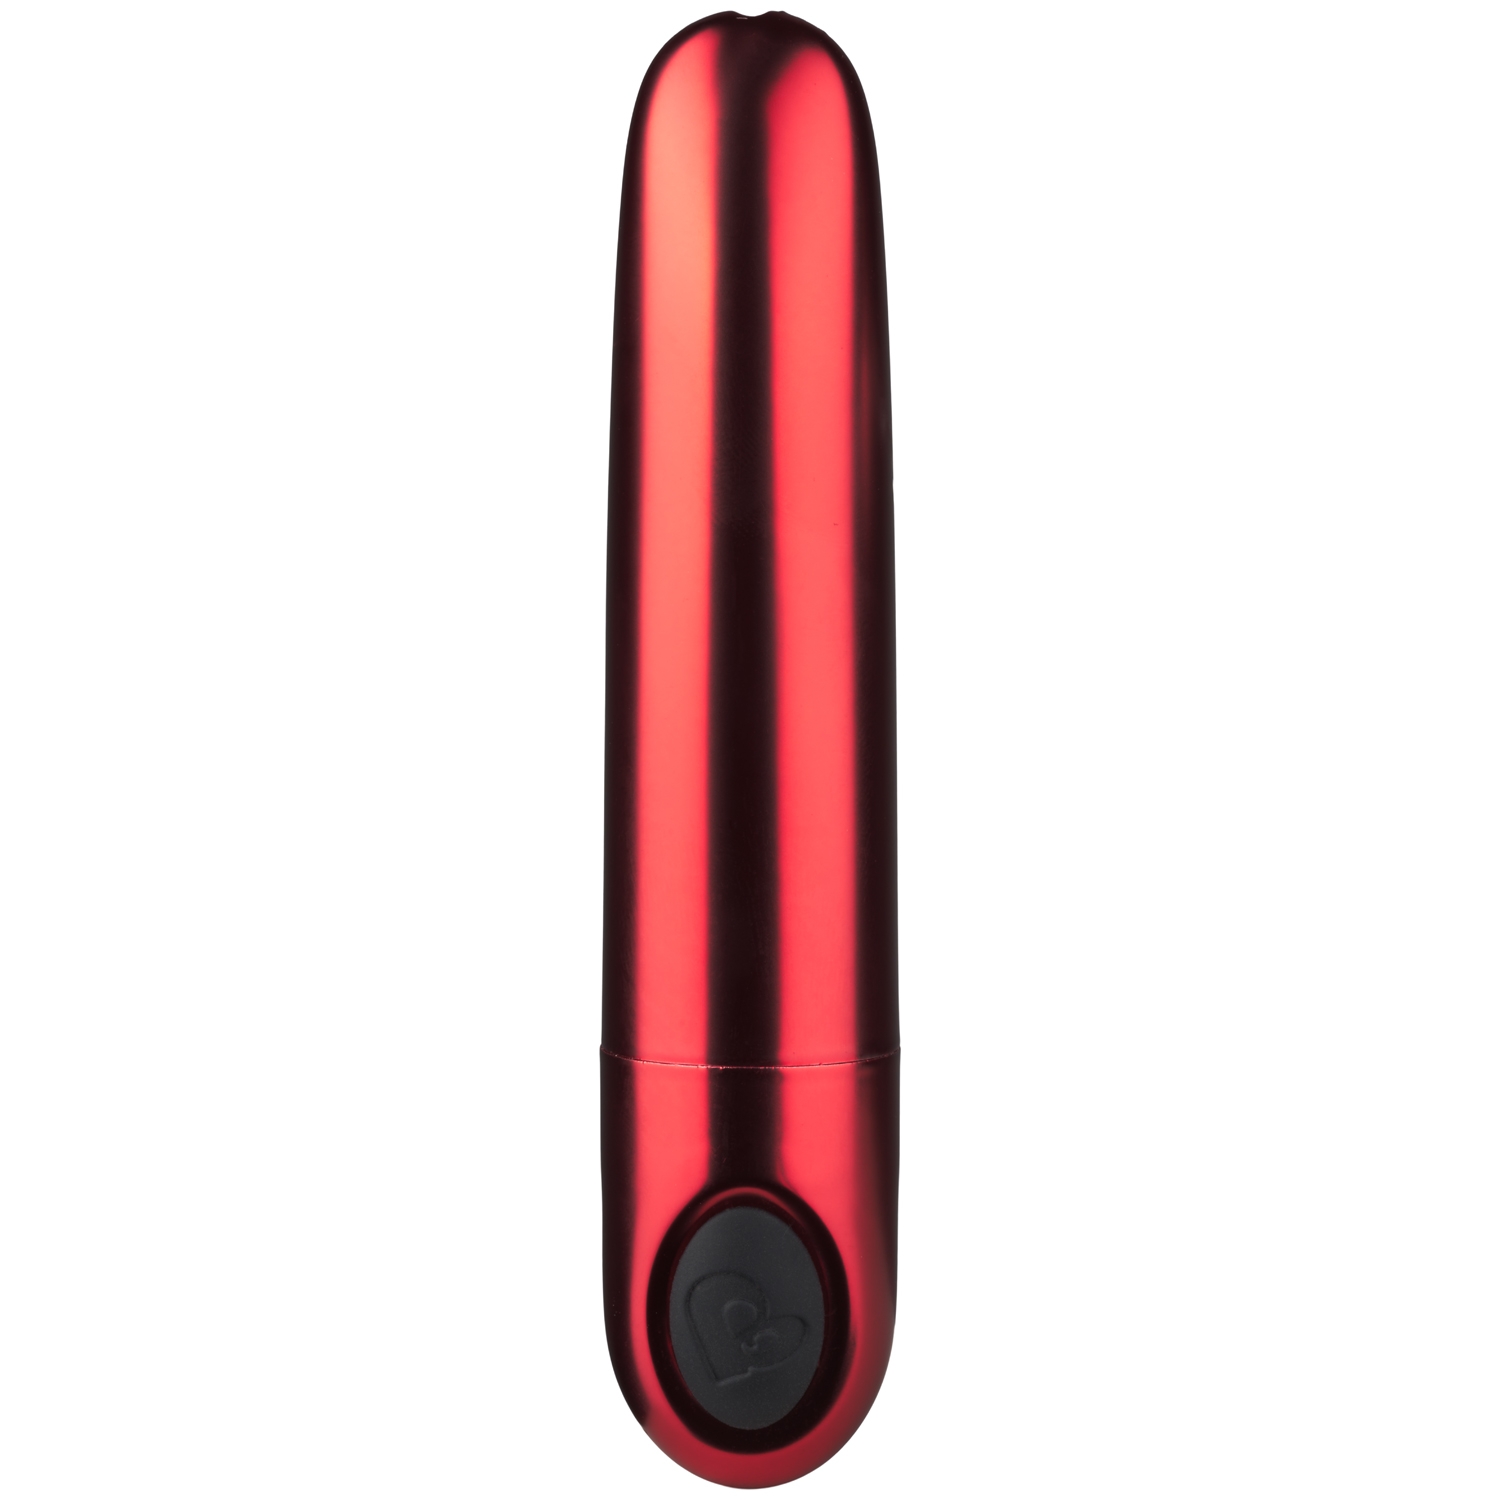 Rocks Off Truly Yours Ruby Caress Bullet Vibrator - Red thumbnail